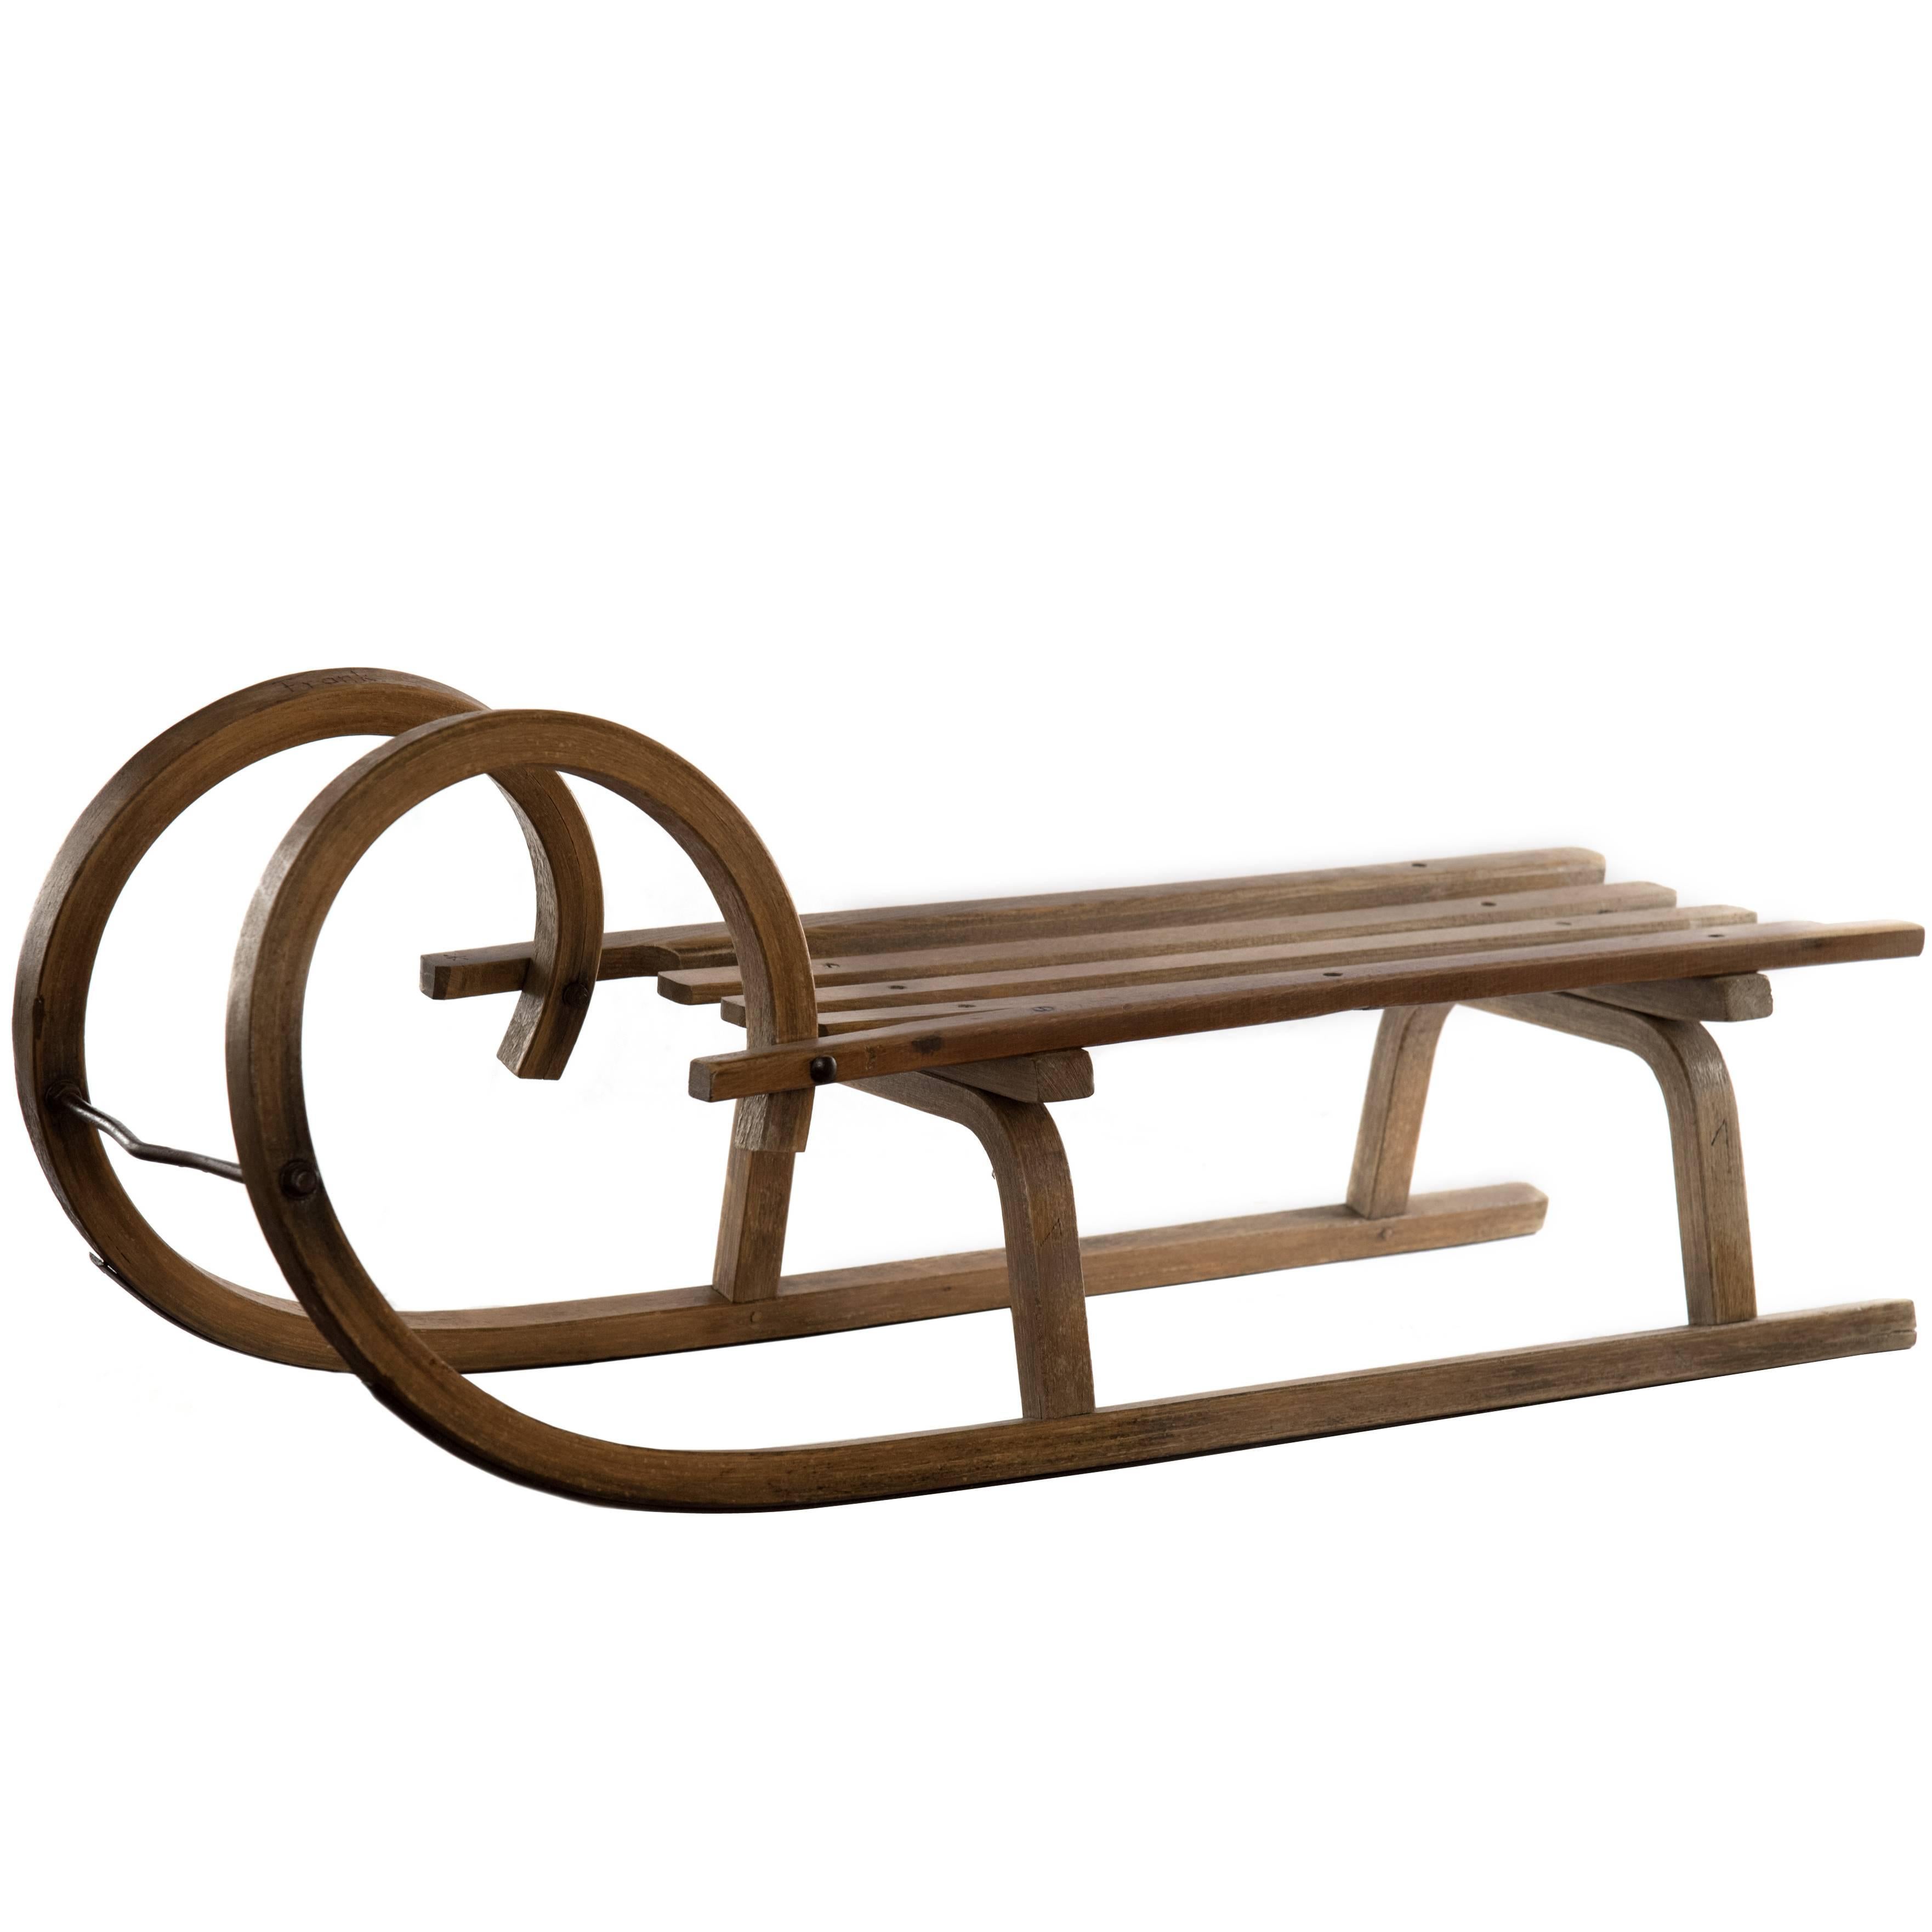 19th Century Grindelwald Ram's Horn Wooden Sled